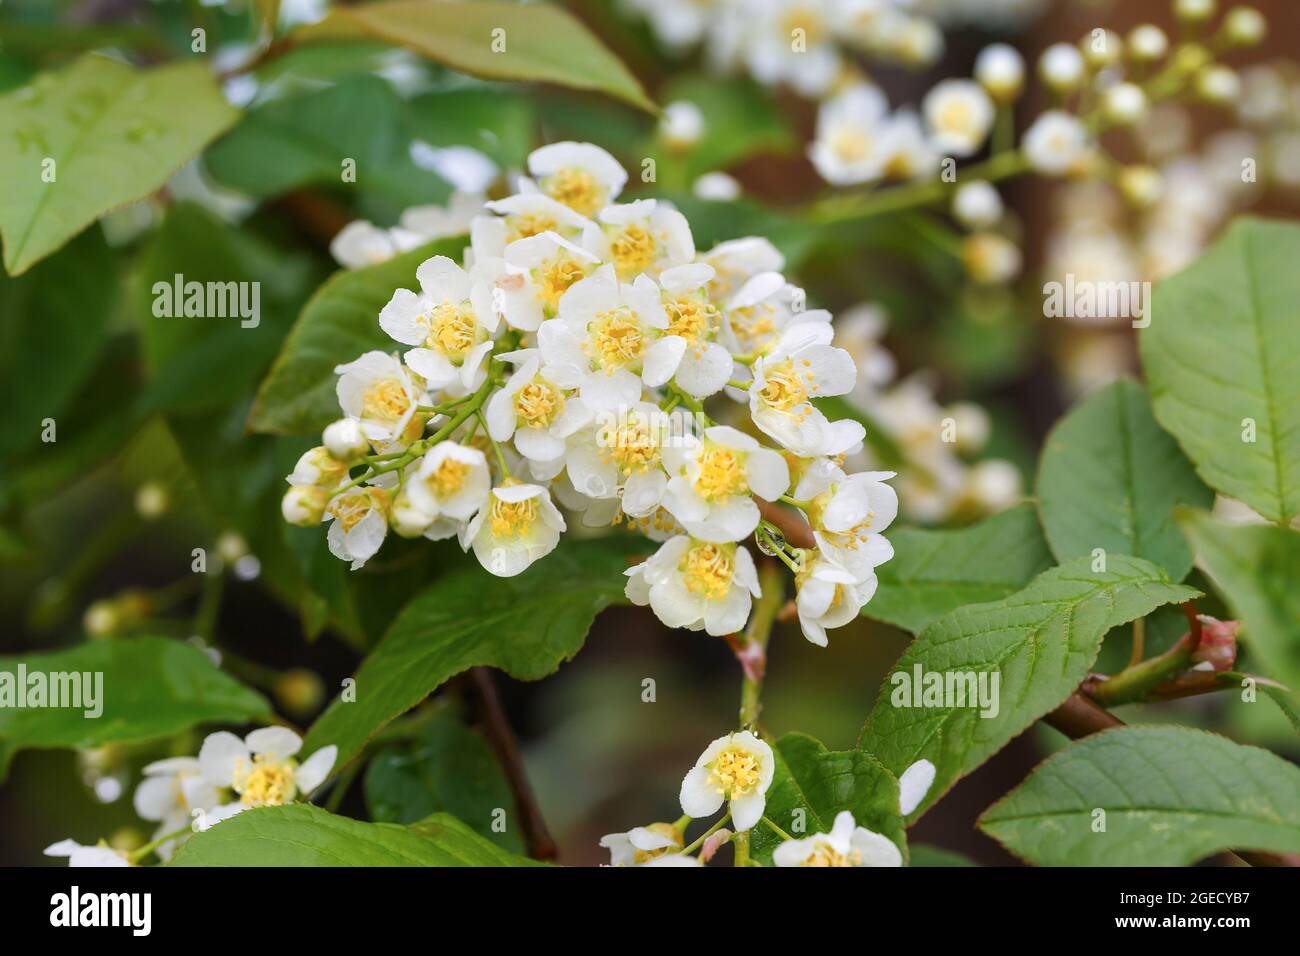 Branch of bird cherry in spring, with white flowers, close up Stock Photo